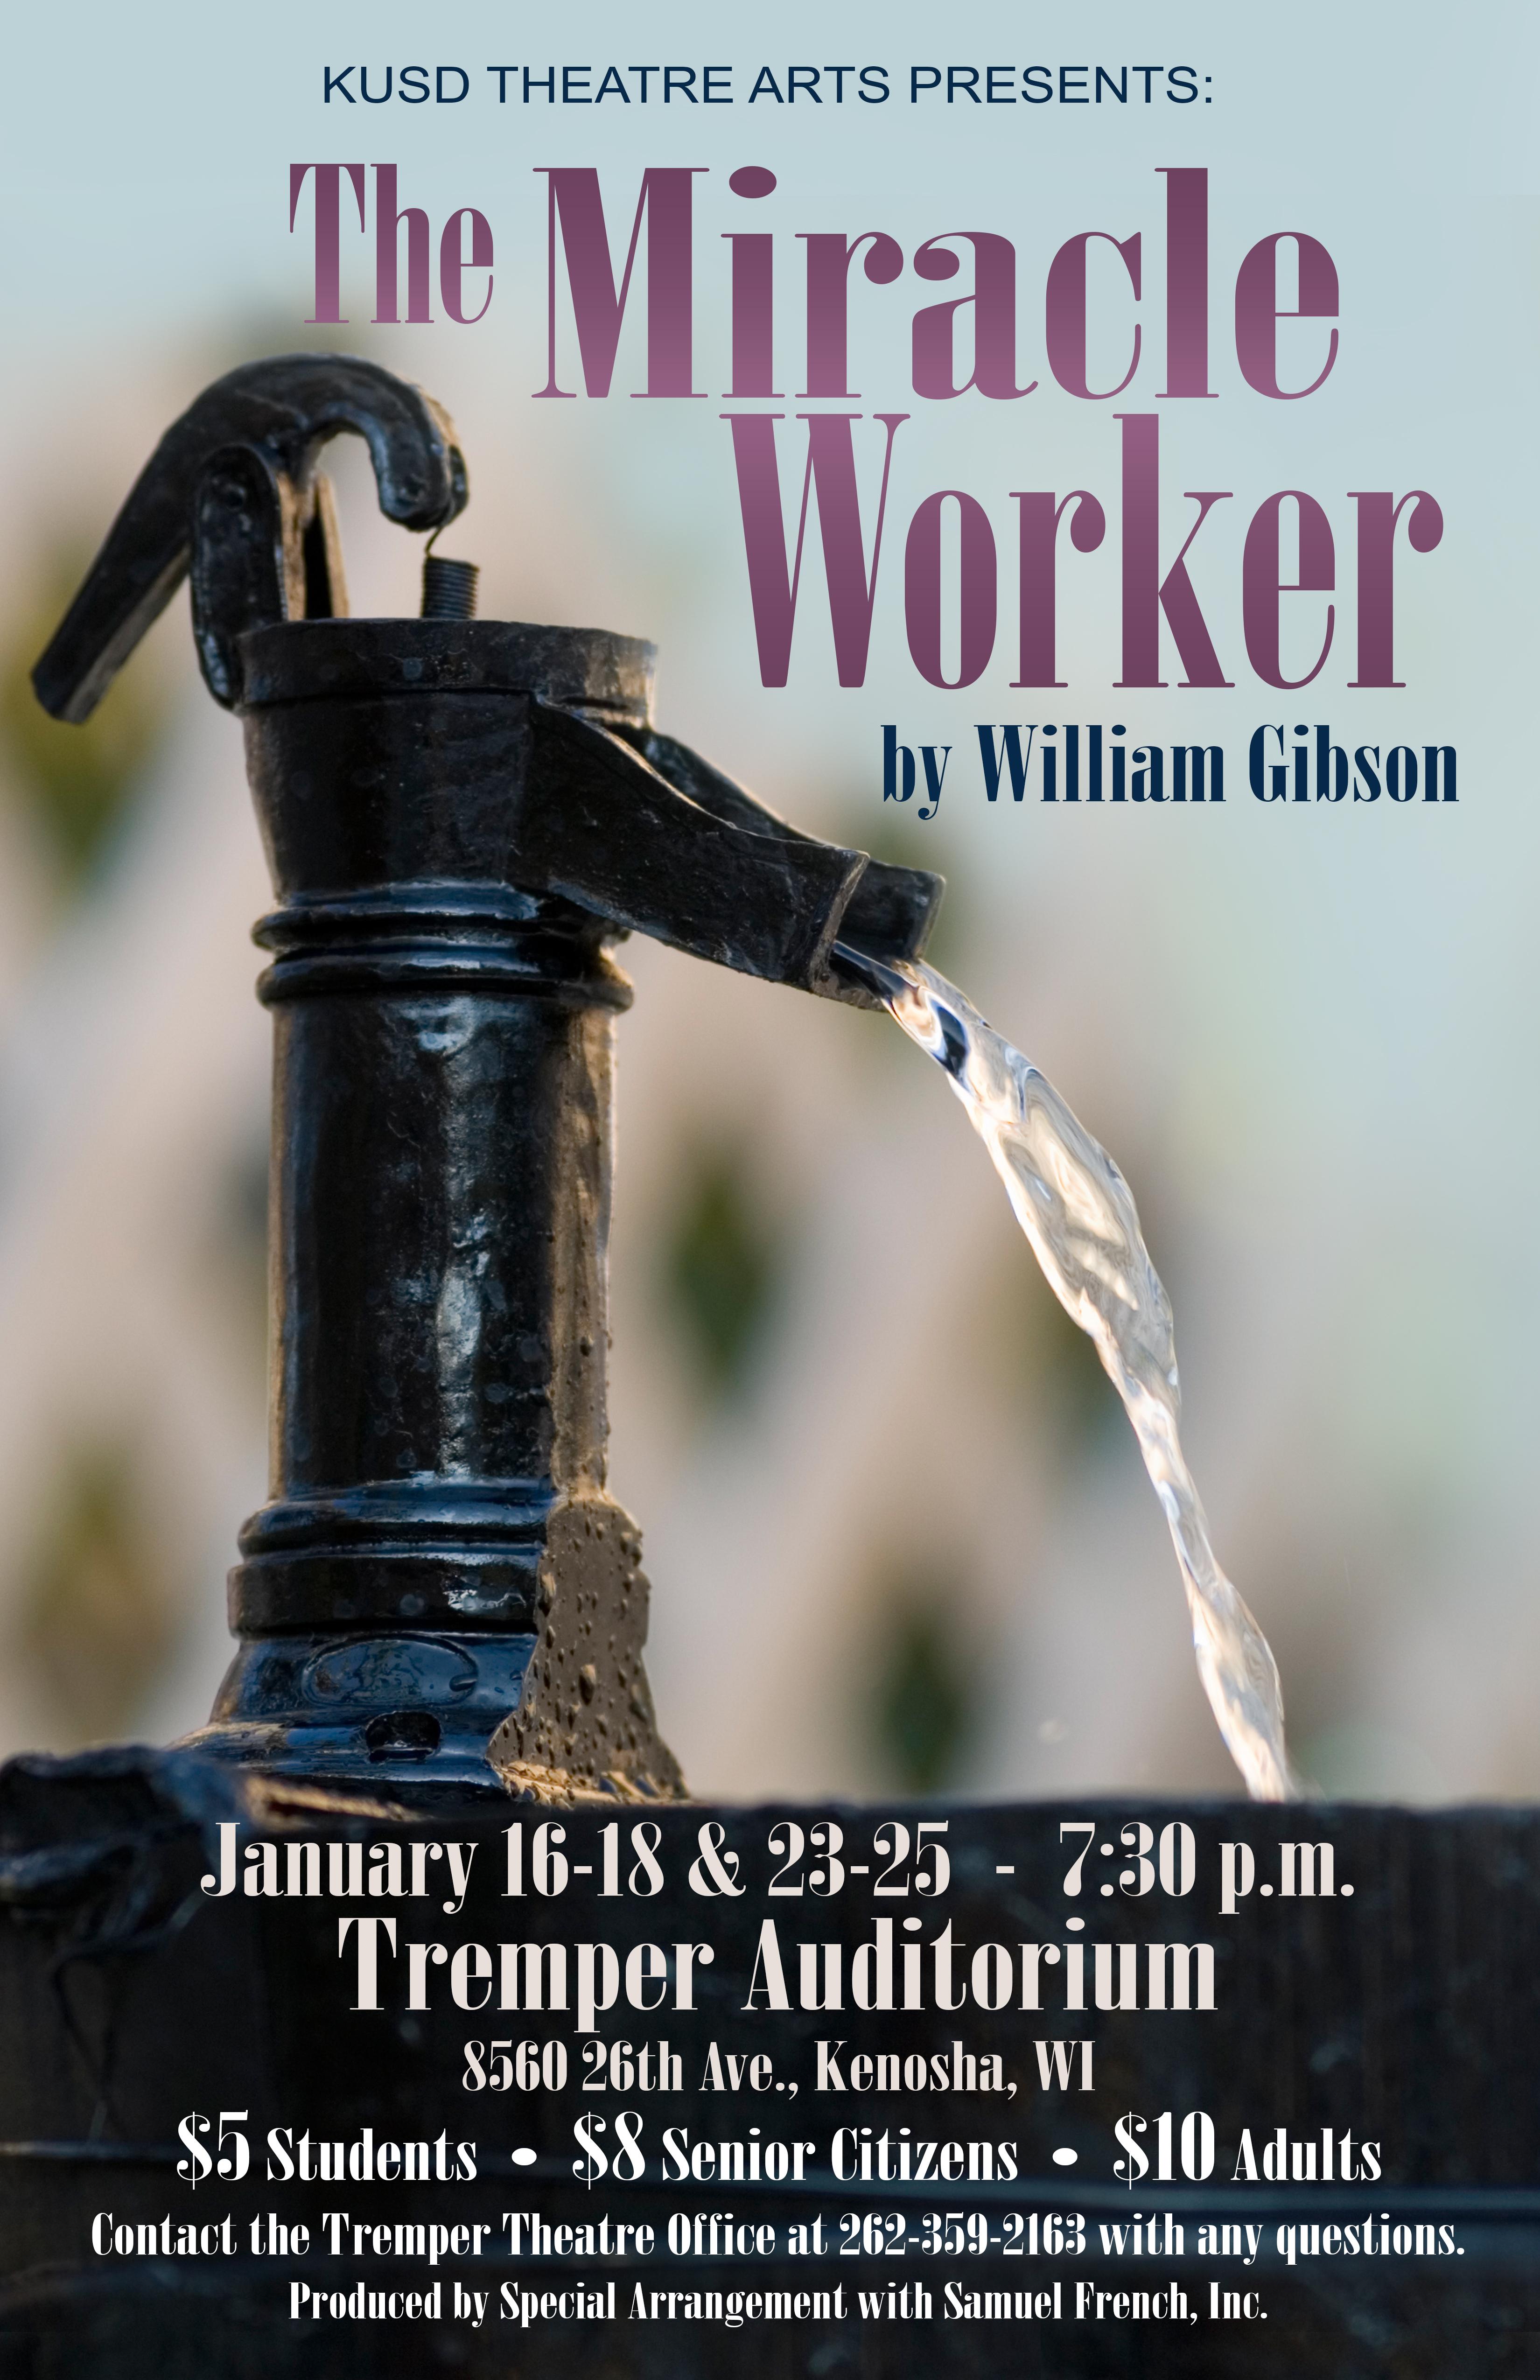 The poster for The Miracle Worker